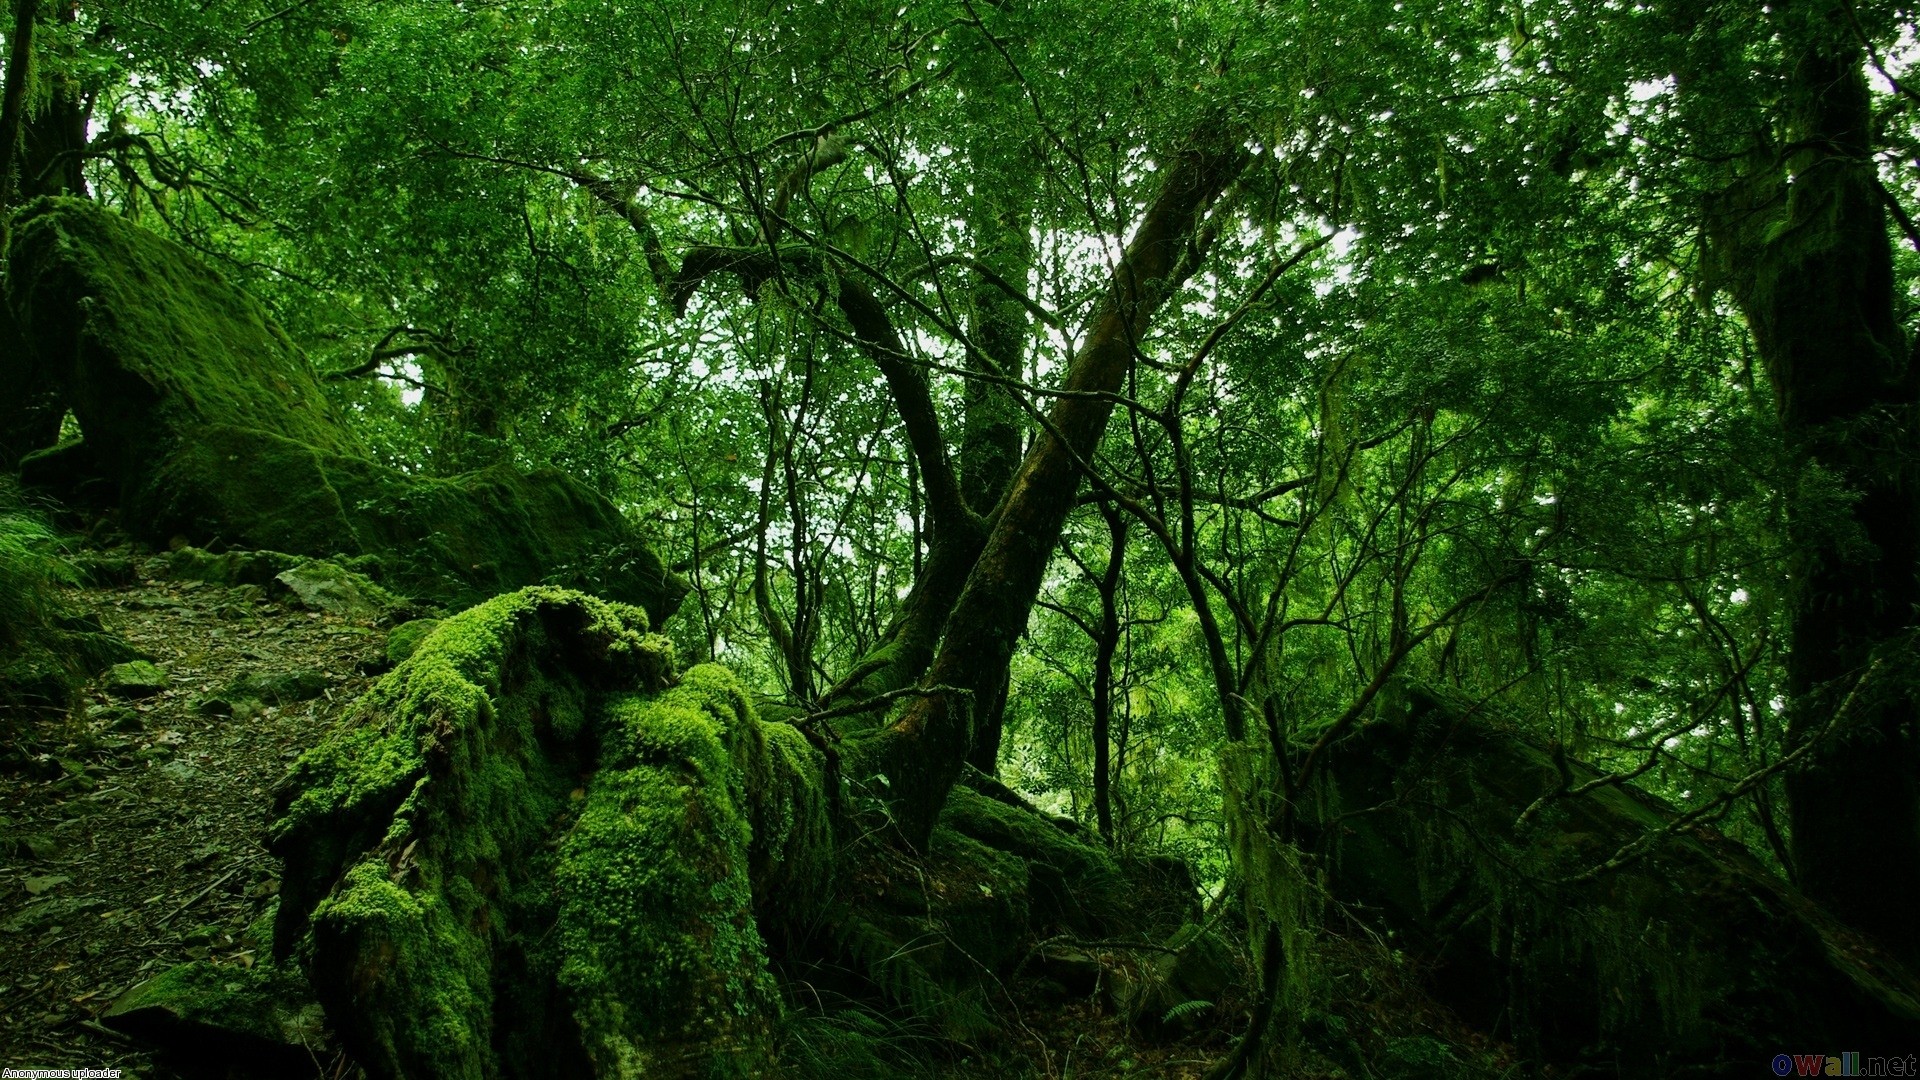 General 1920x1080 forest trees nature green plants outdoors